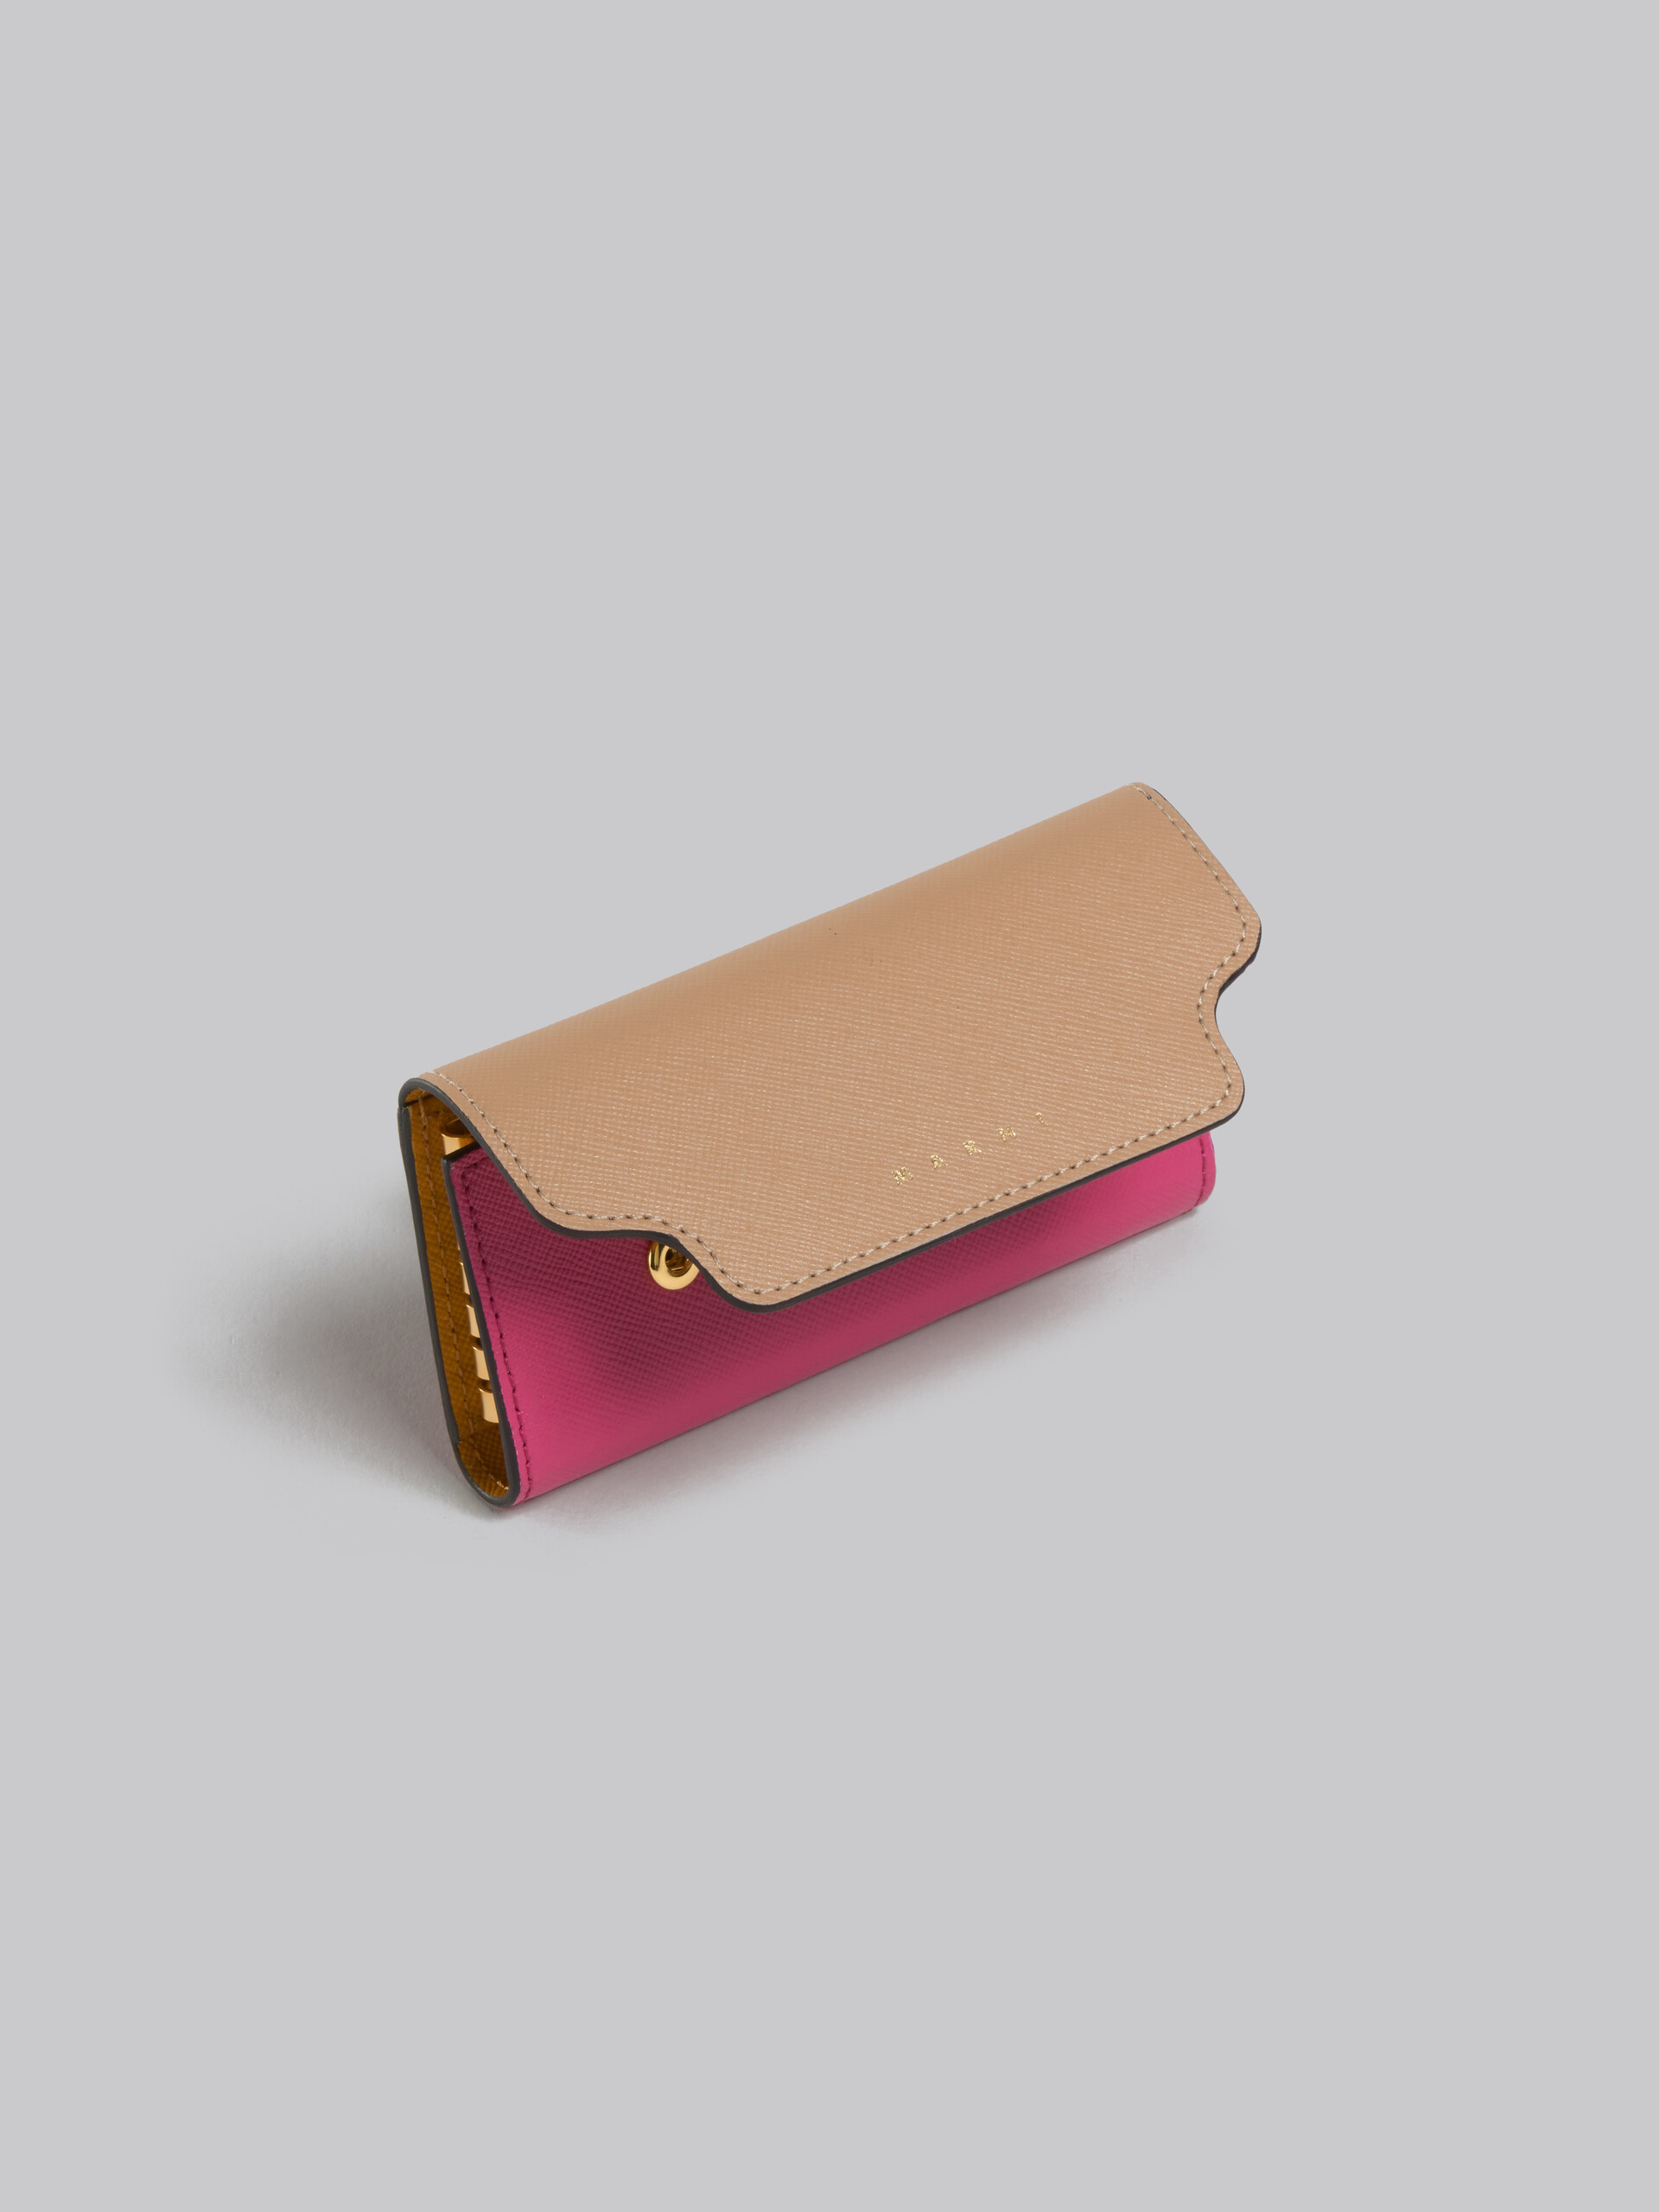 Beige pink and orange saffiano leather card case